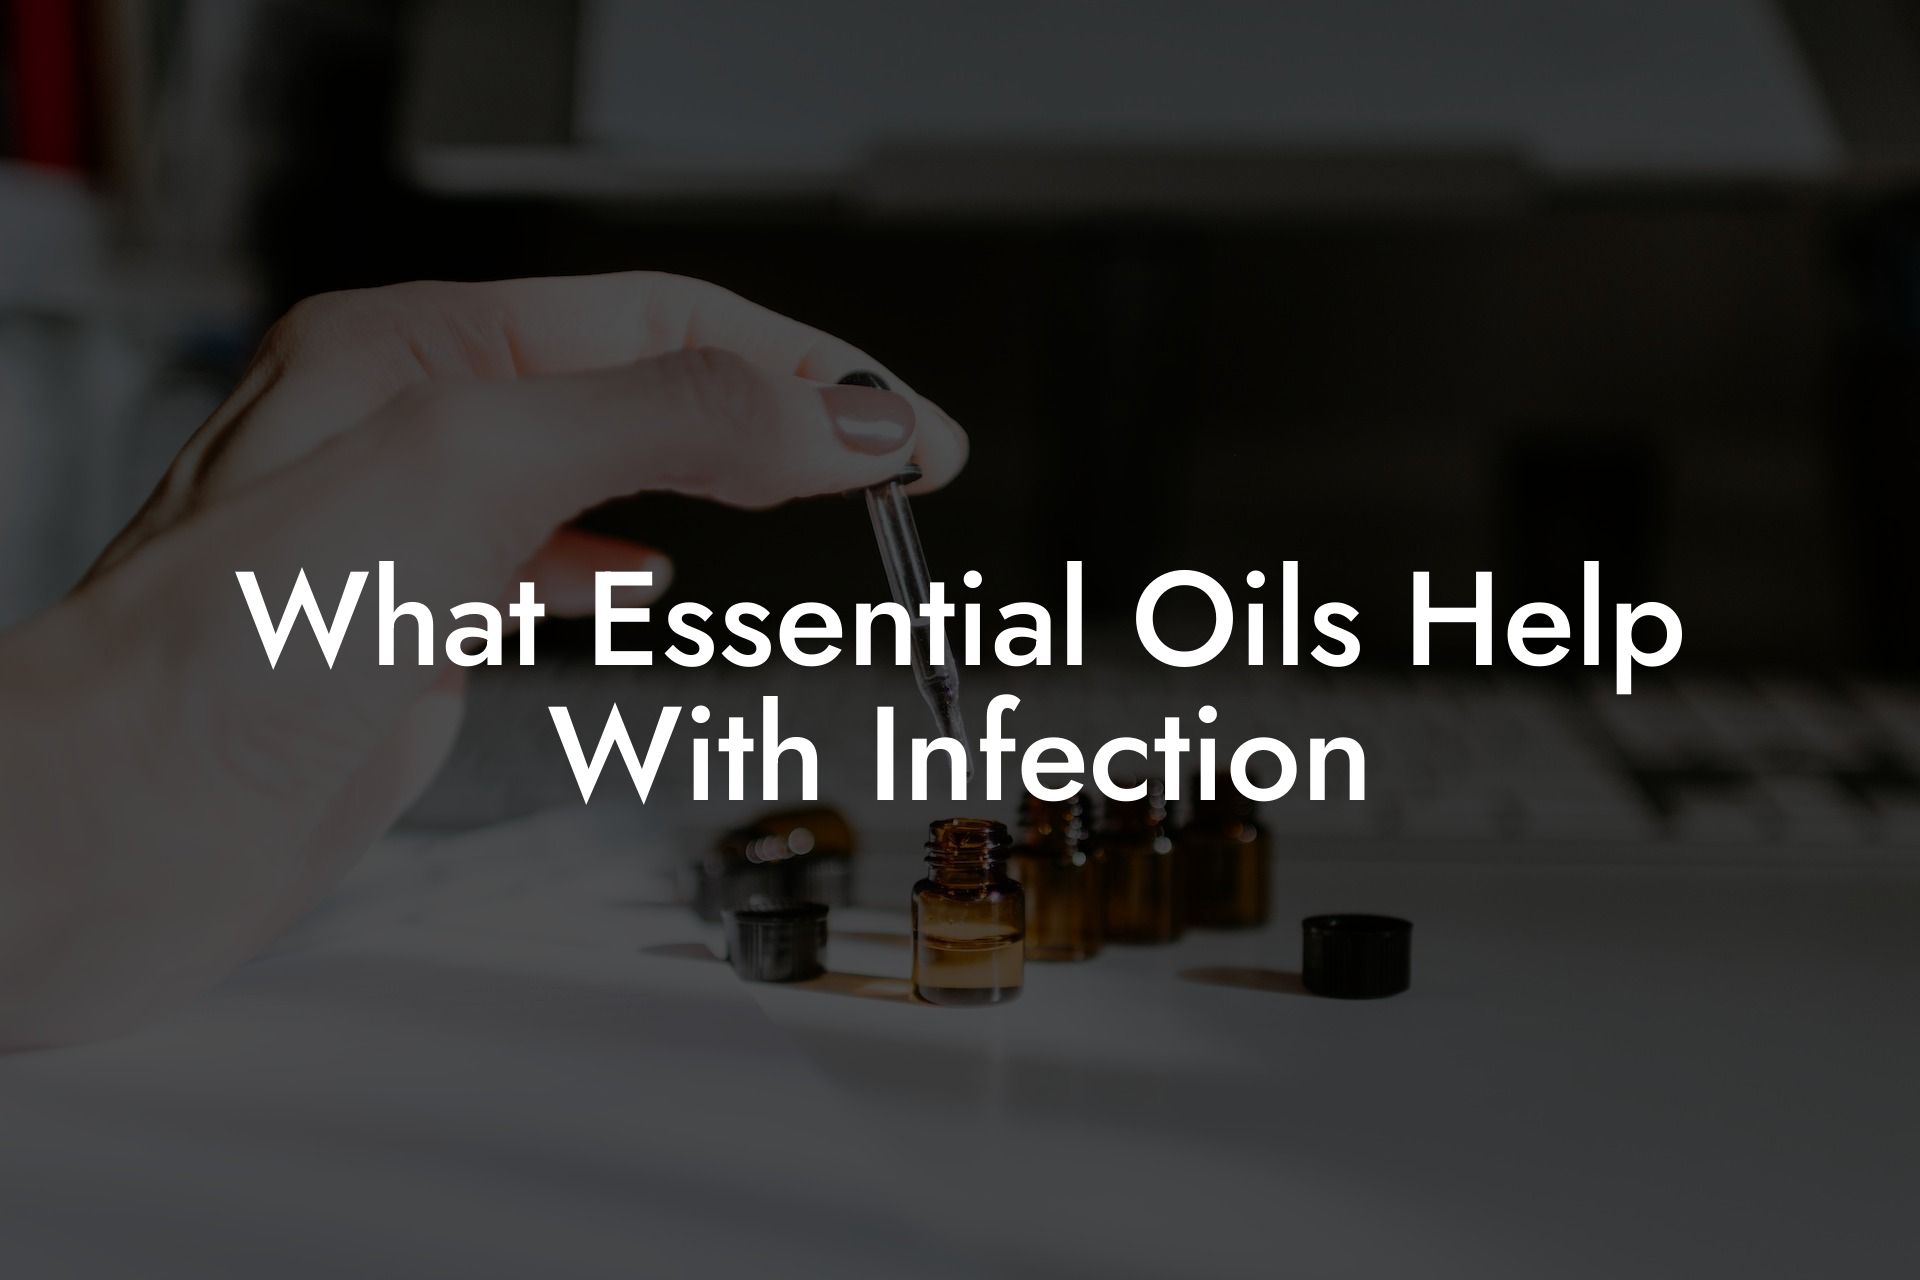 What Essential Oils Help With Infection